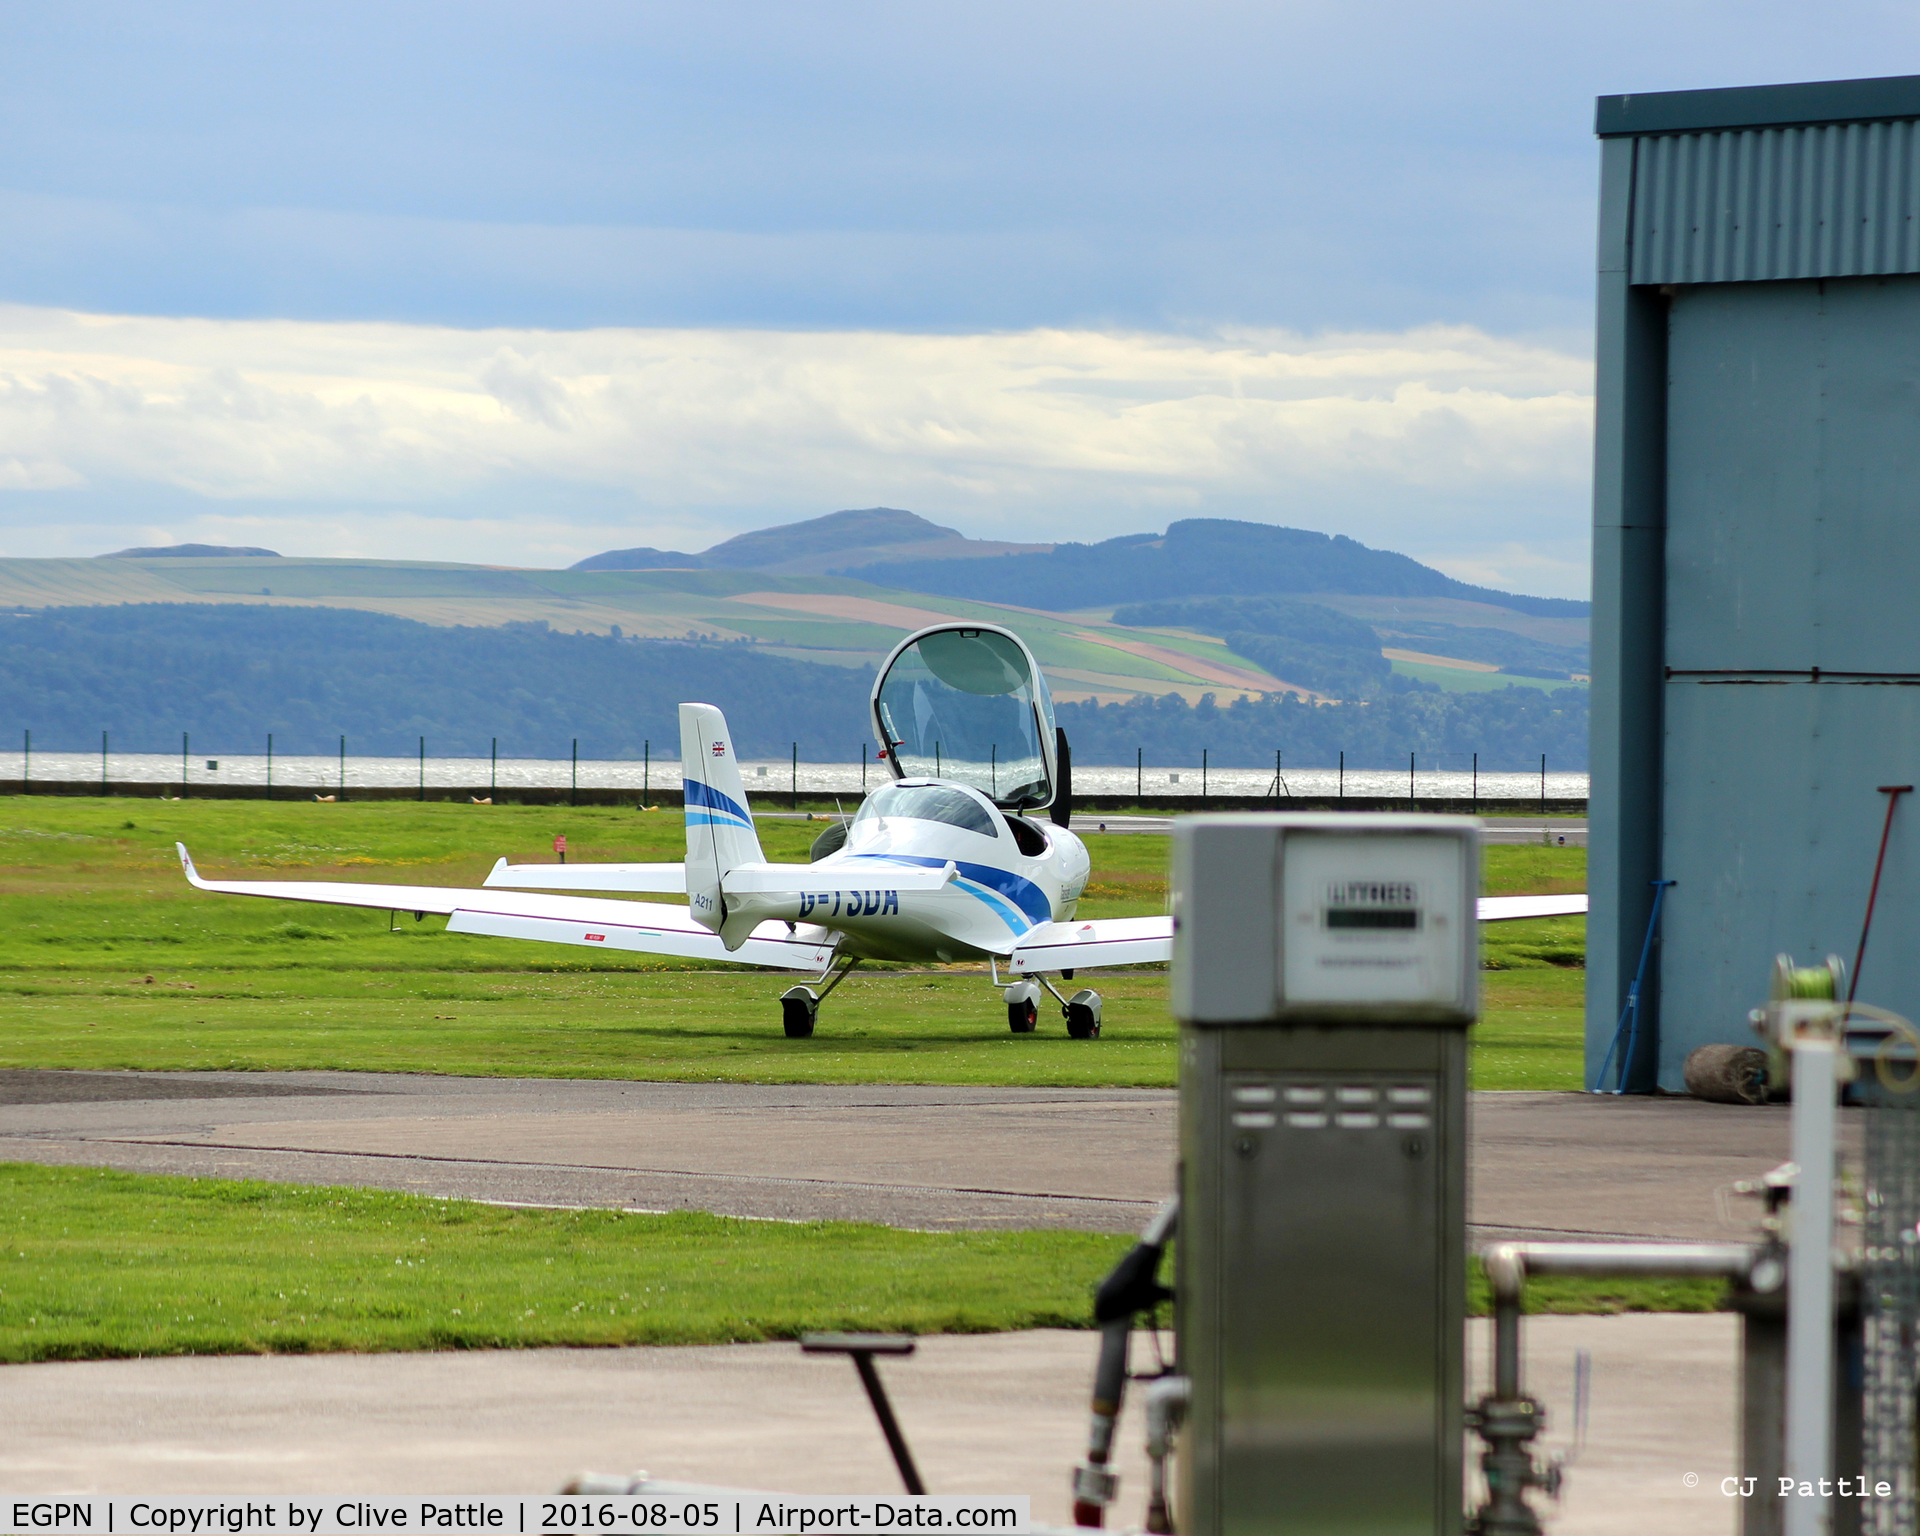 Dundee Airport, Dundee, Scotland United Kingdom (EGPN) - Tayside Aviation area at Dundee Riverside EGPN. 